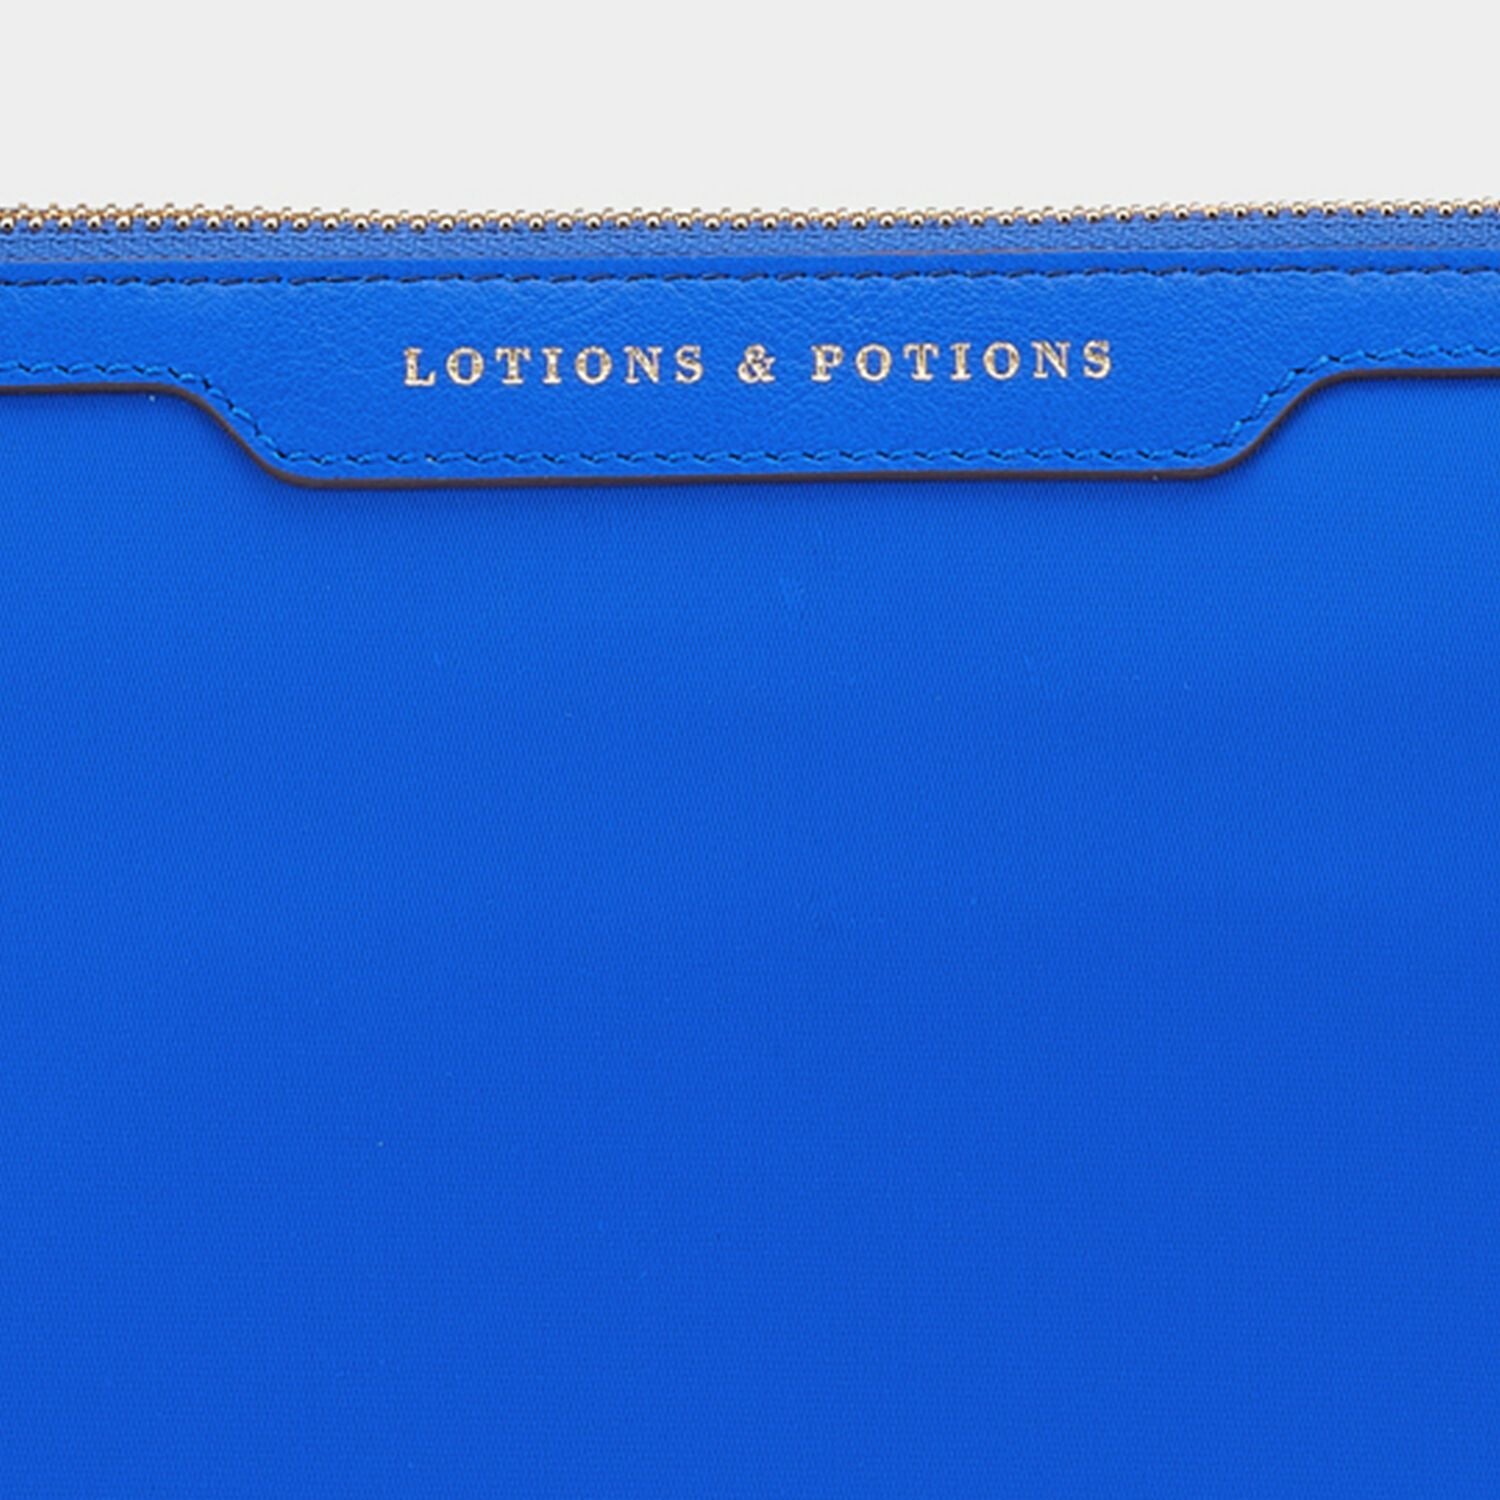 「Lotions and Potions」ポーチ -

                  
                    Nylon in Electric Blue -
                  

                  Anya Hindmarch JP
